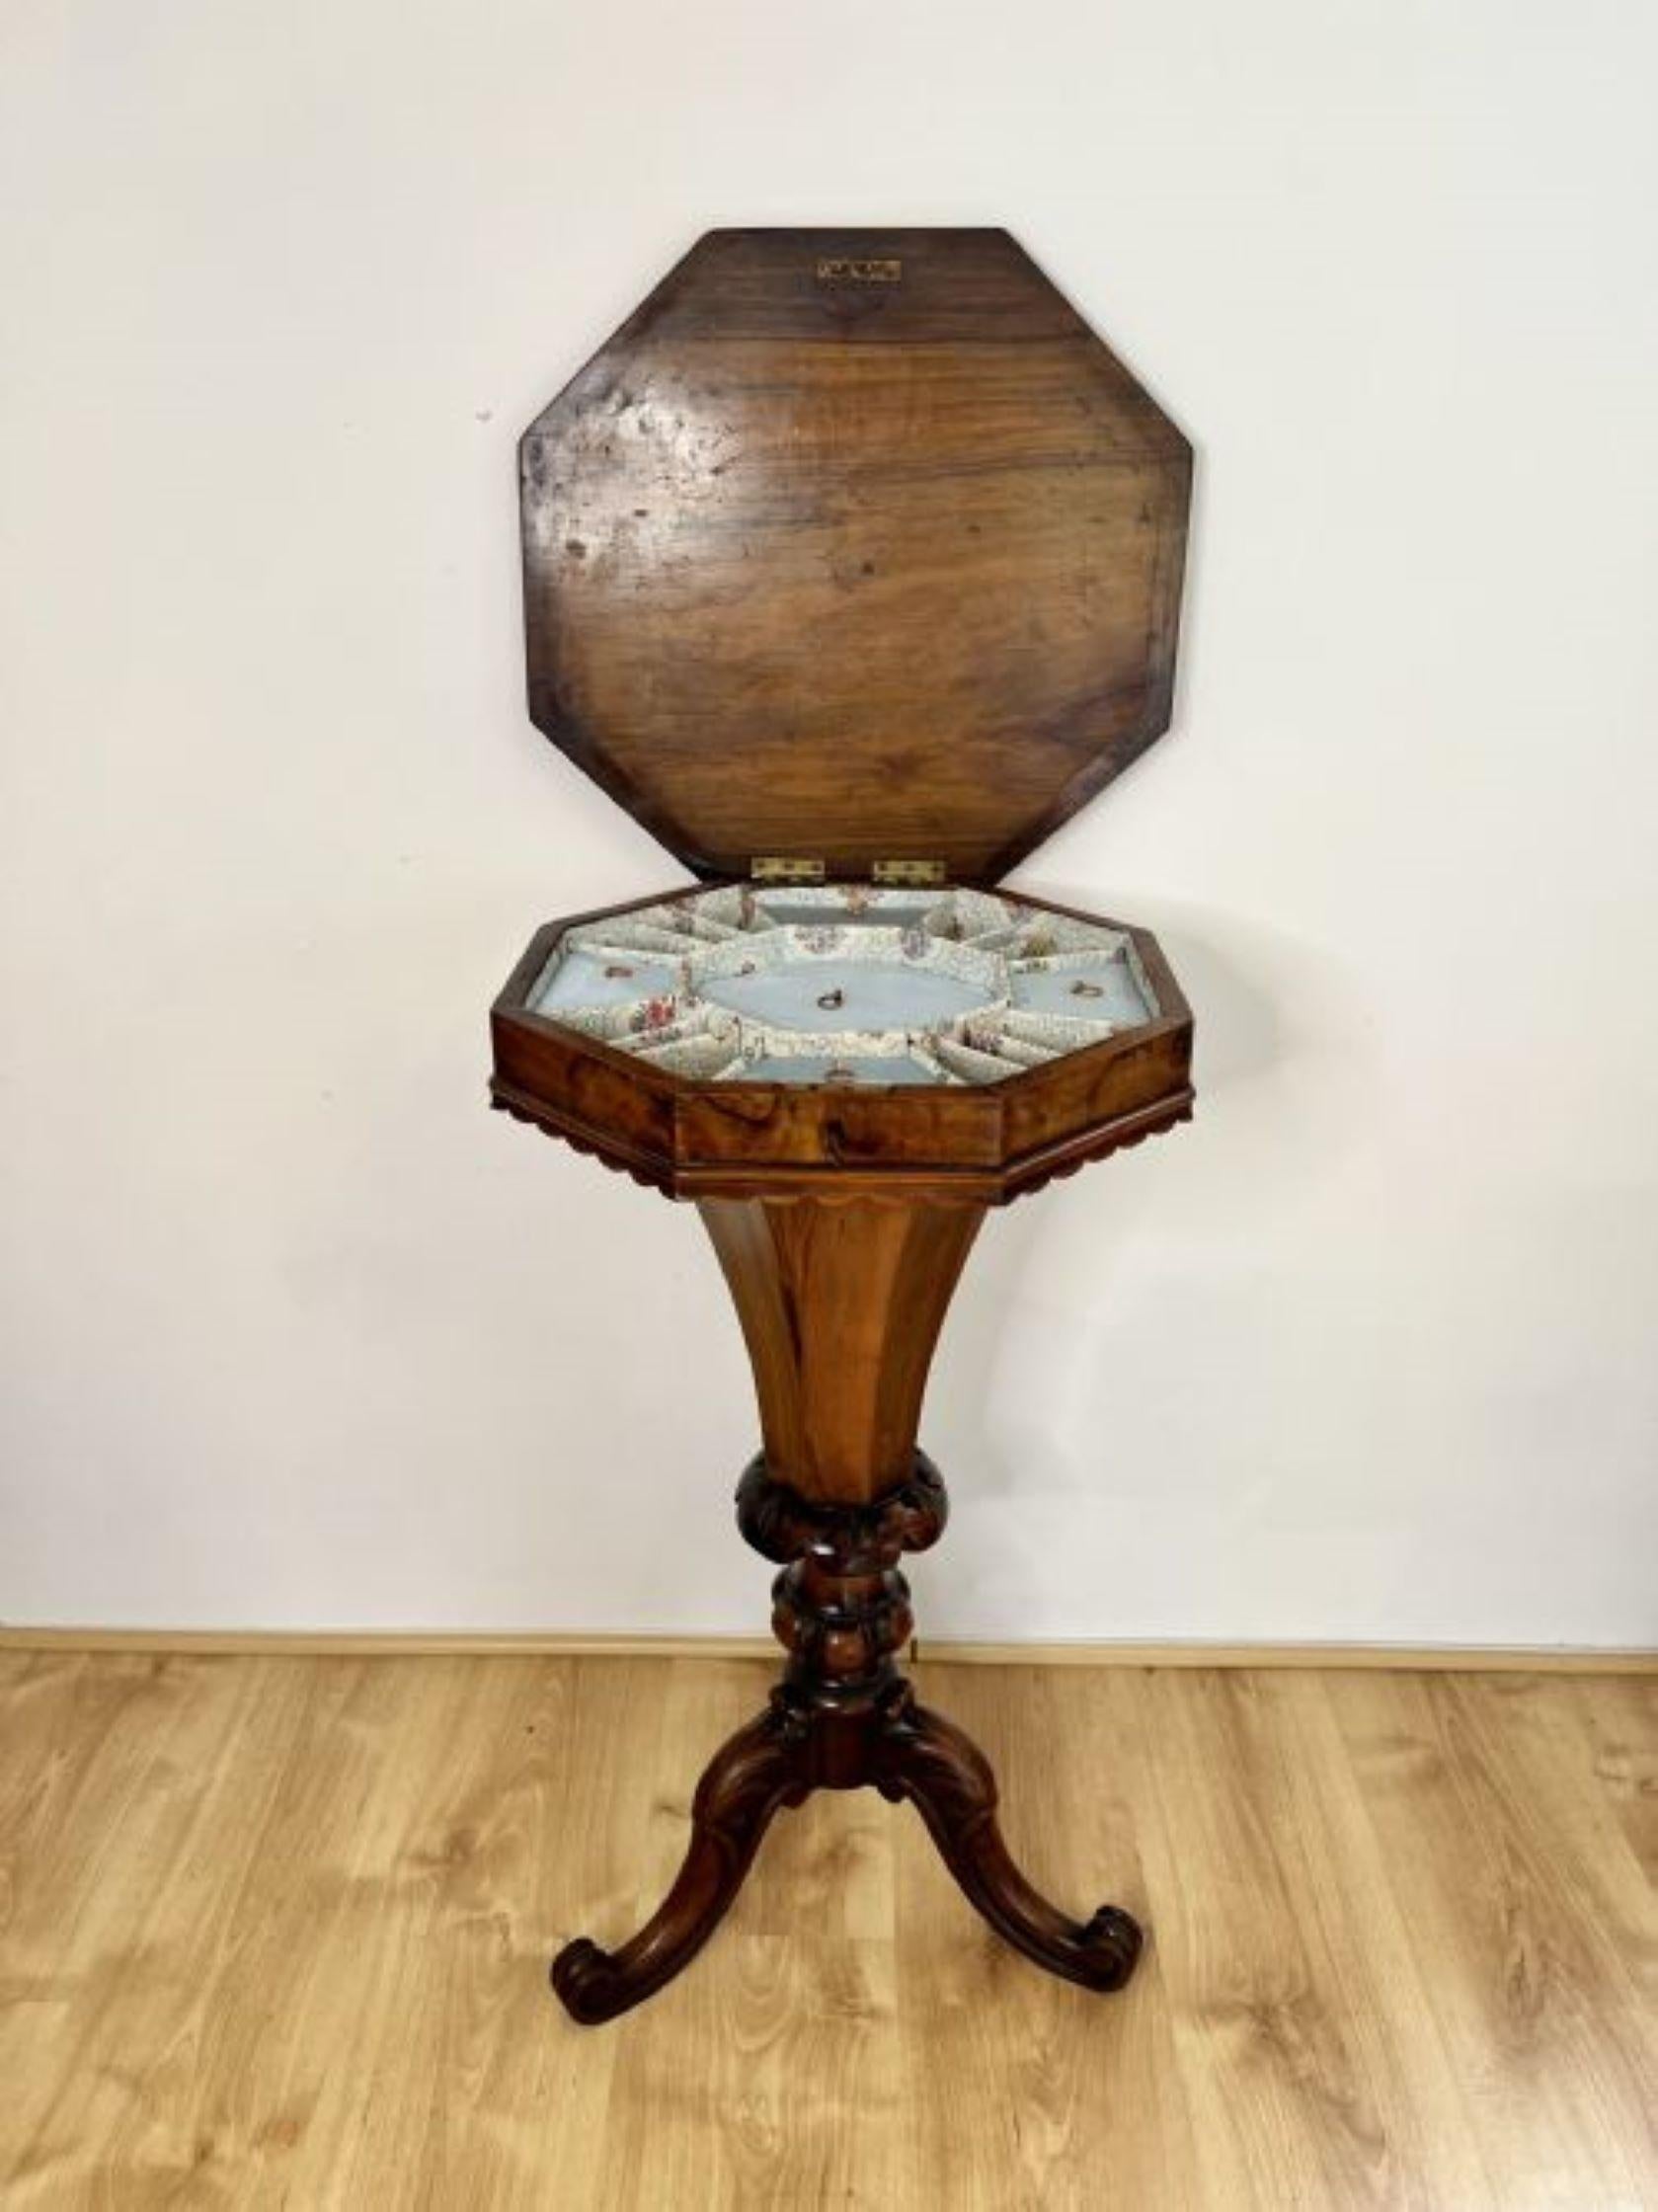 Fantastic quality antique Victorian burr walnut trumpet work table having a quality burr walnut lift up top with a moulded edge opening to reveal a fitted interior, carved walnut freeze shaped storage compartment standing on three shaped carved